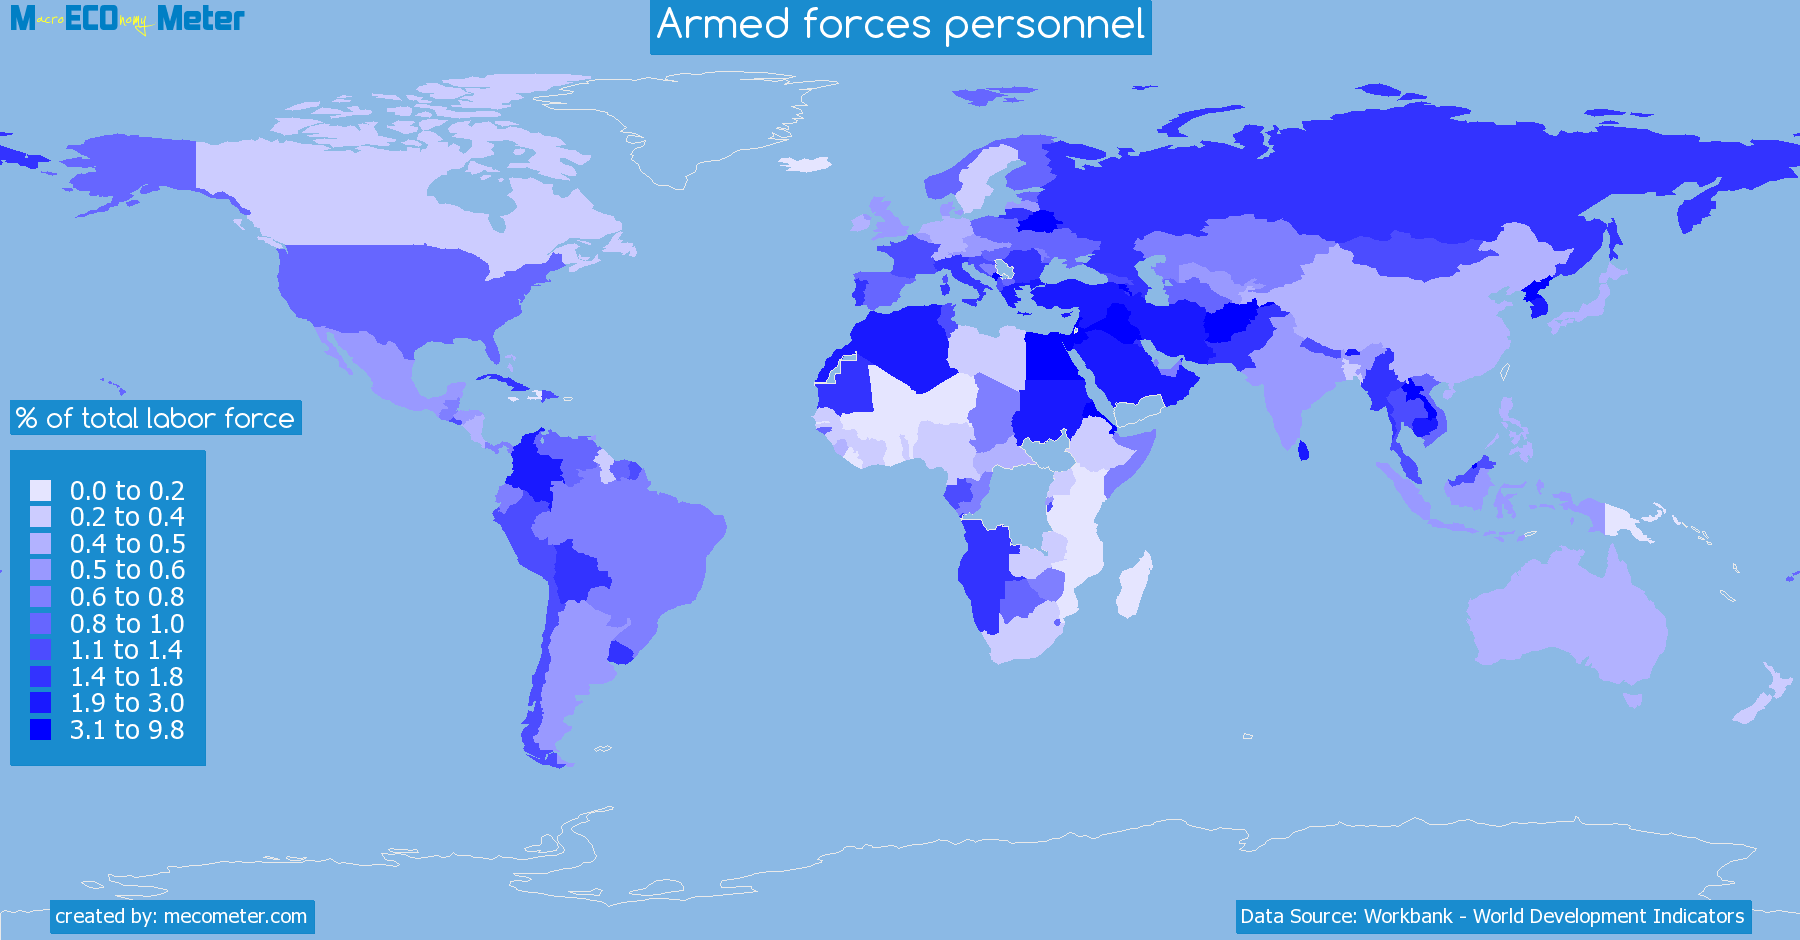 Armed forces personnel